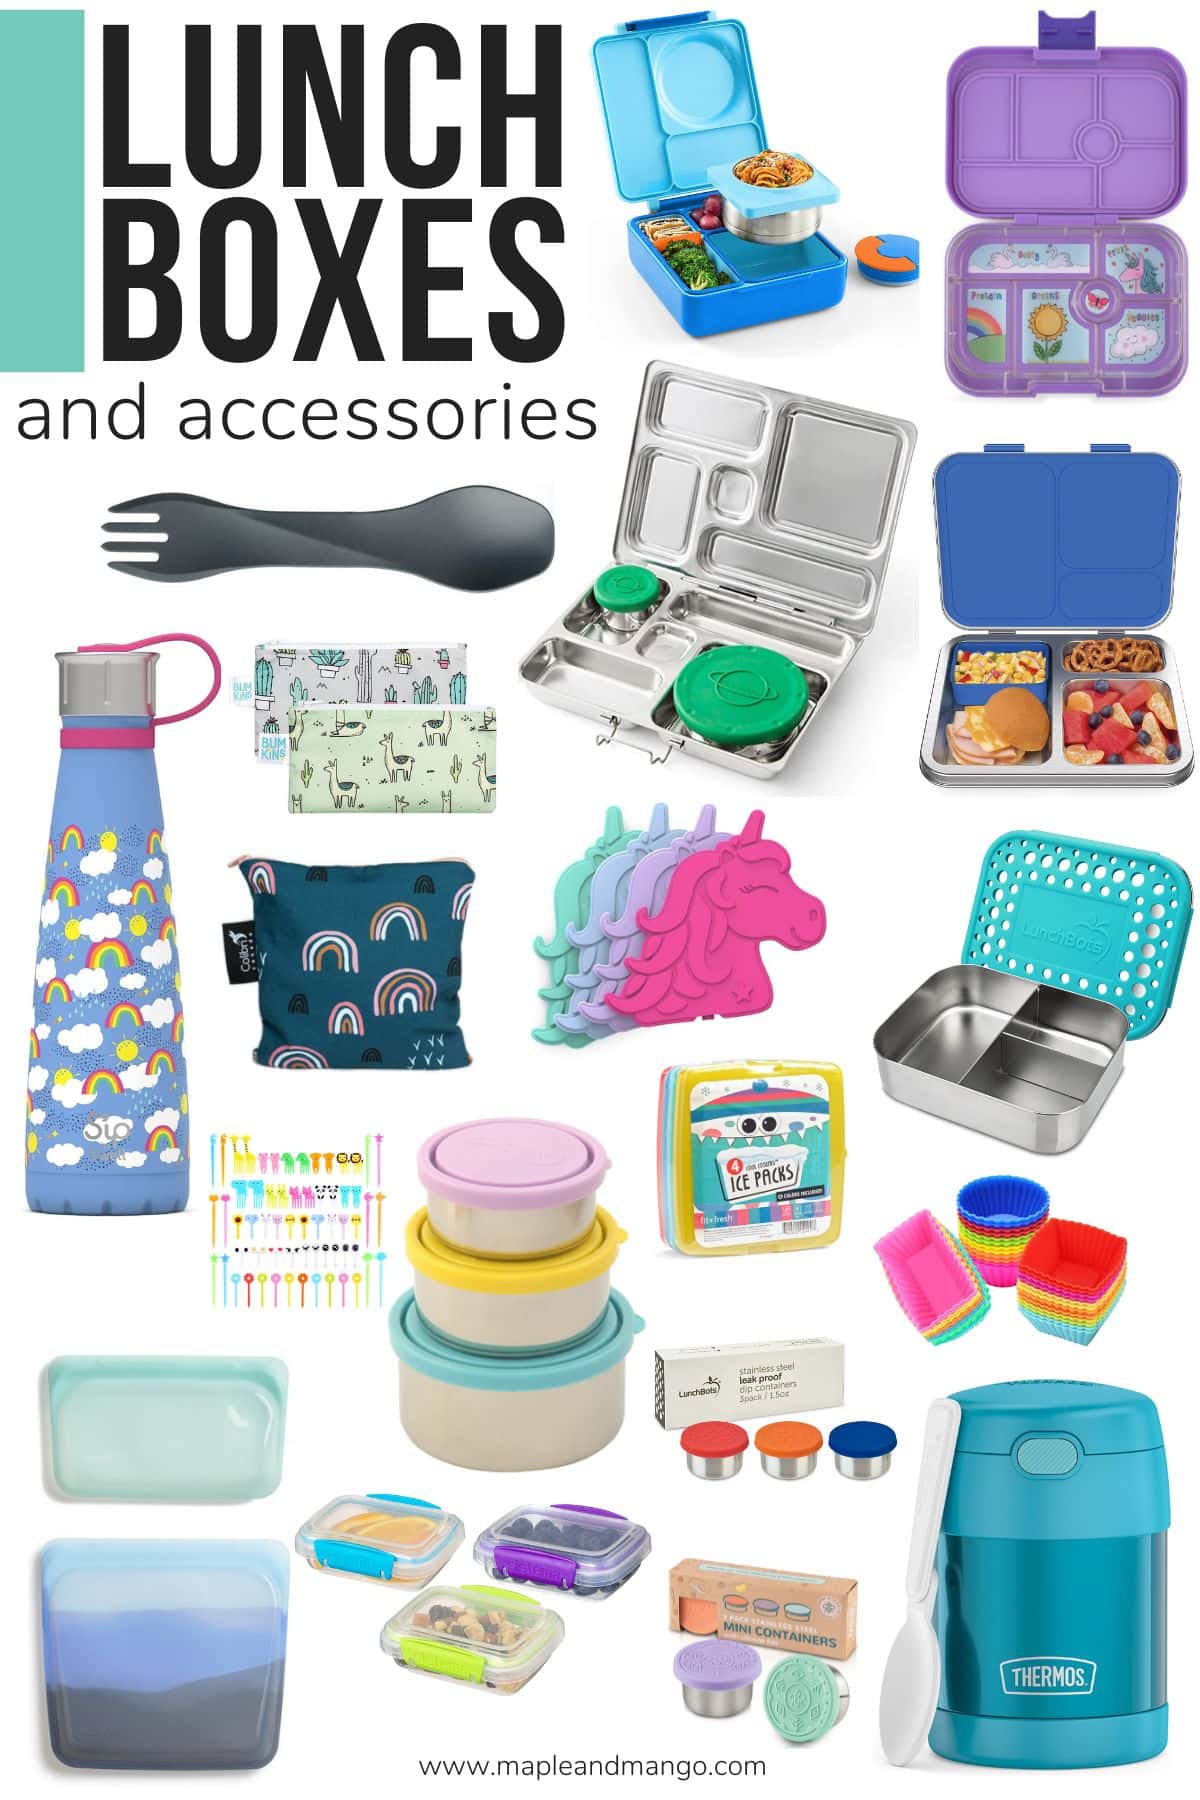 Photo collage graphic of lunch boxes and accessories for kids.